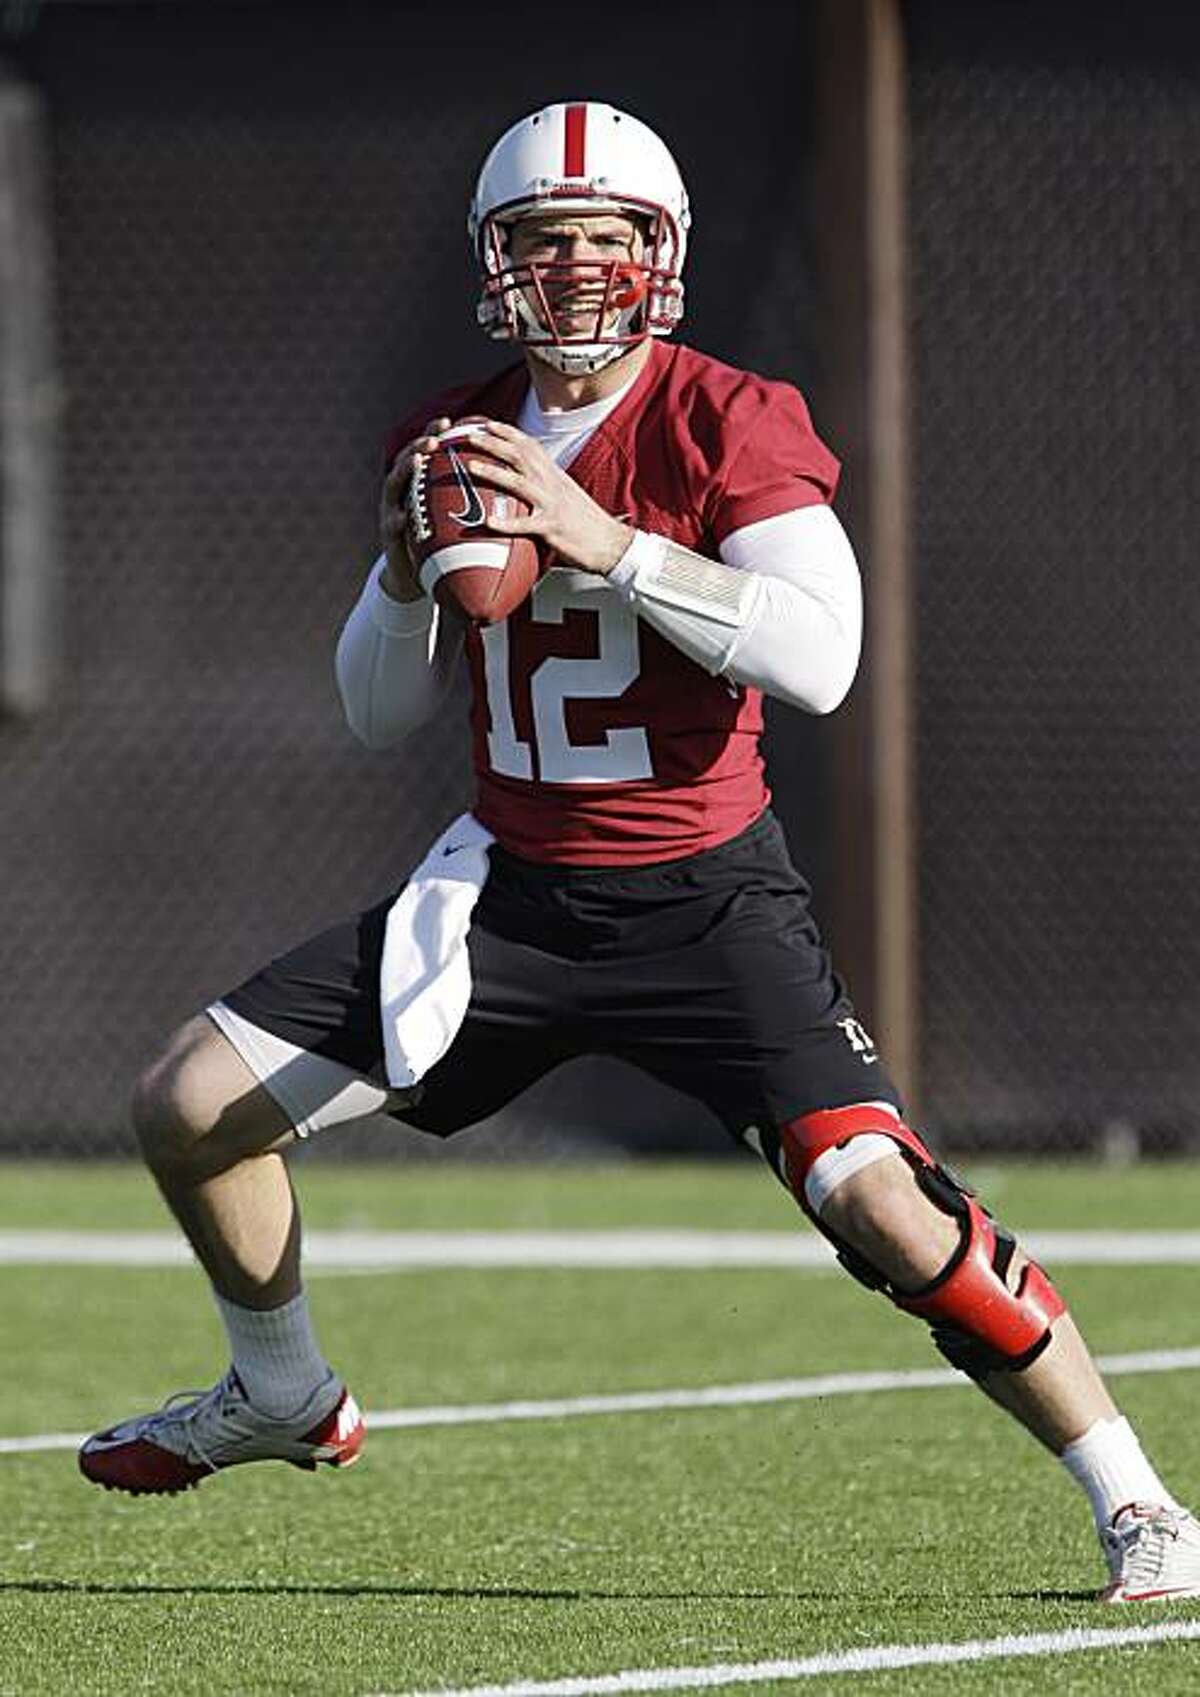 This photo made Feb. 23, 2011, shows Stanford quarterback Andrew Luck painges during an NCAA college football practice on the Stanford University campus in Stanford, Calif. Luck knows there will be a ton of pressure and pageantry that will follow him next fall as the presumptive Heisman Trophy favorite. He still has no regrets about returning to the Cardinal or turning down being the likely No. 1 pick in the NFL draft this year.